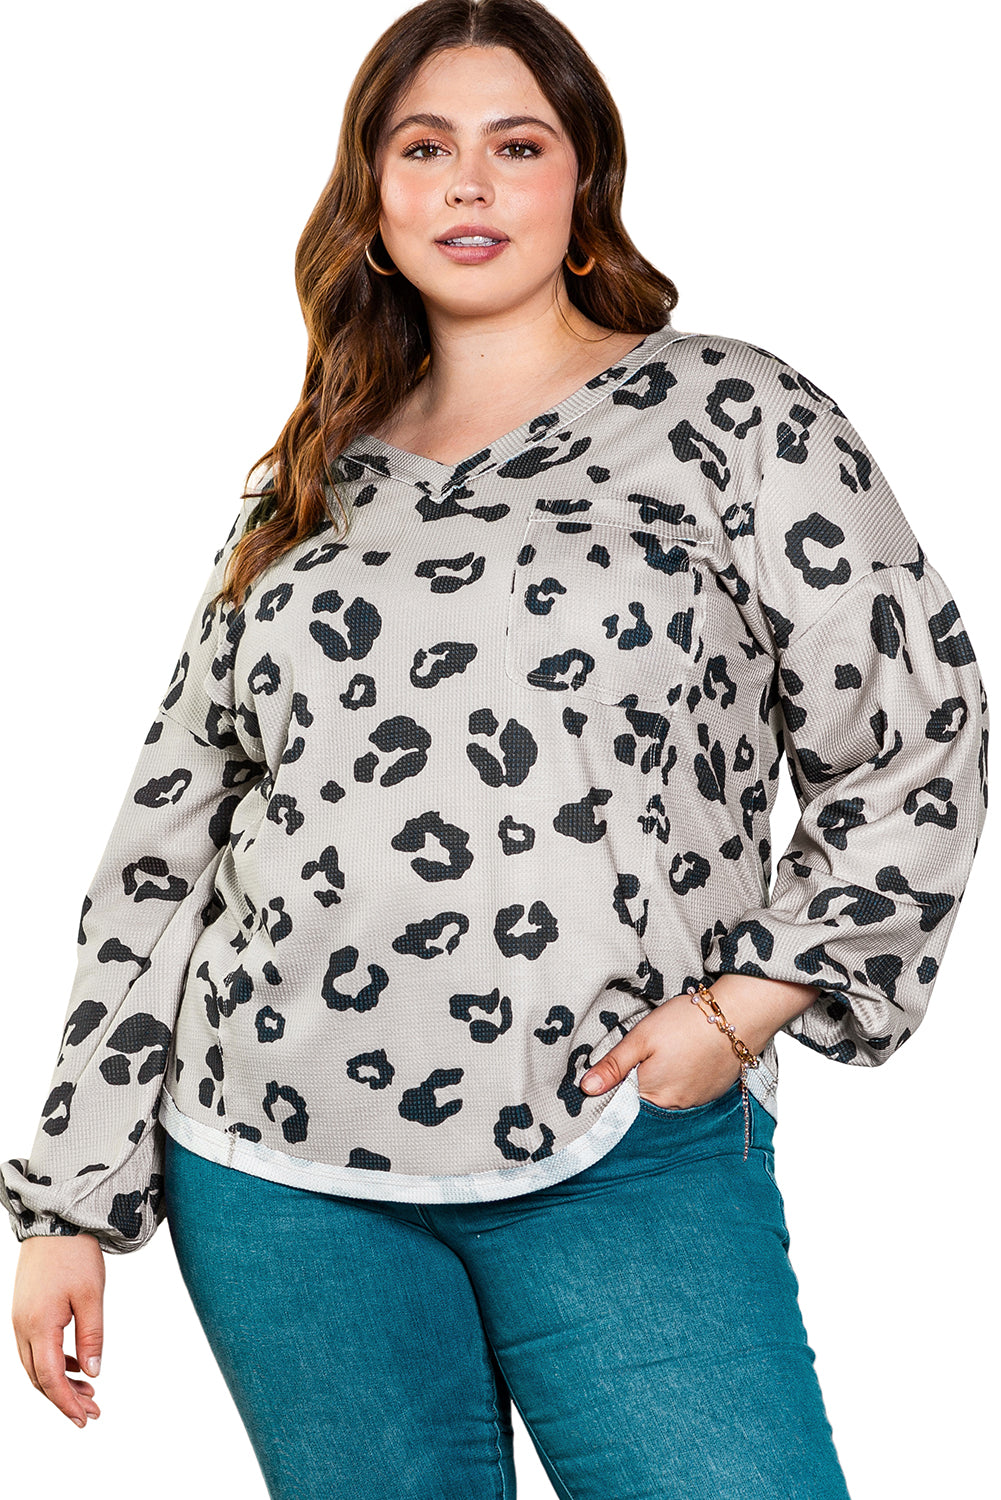 Gray Printed Leopard Balloon Sleeve Thermal Knit Plus Size Top